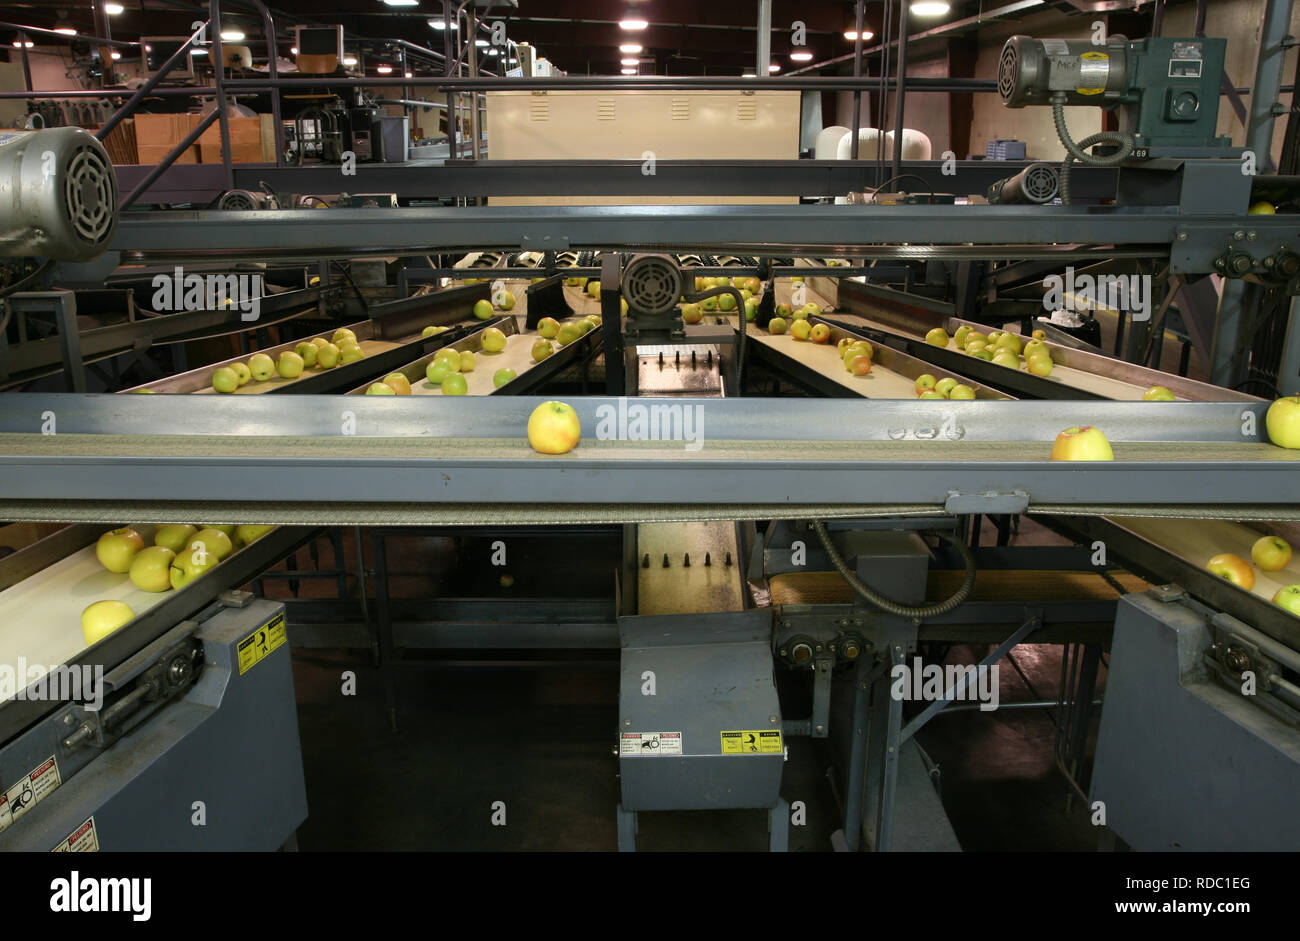 Golden Delicious Apples on conveyor belts in a fruit packing warehouse Stock Photo